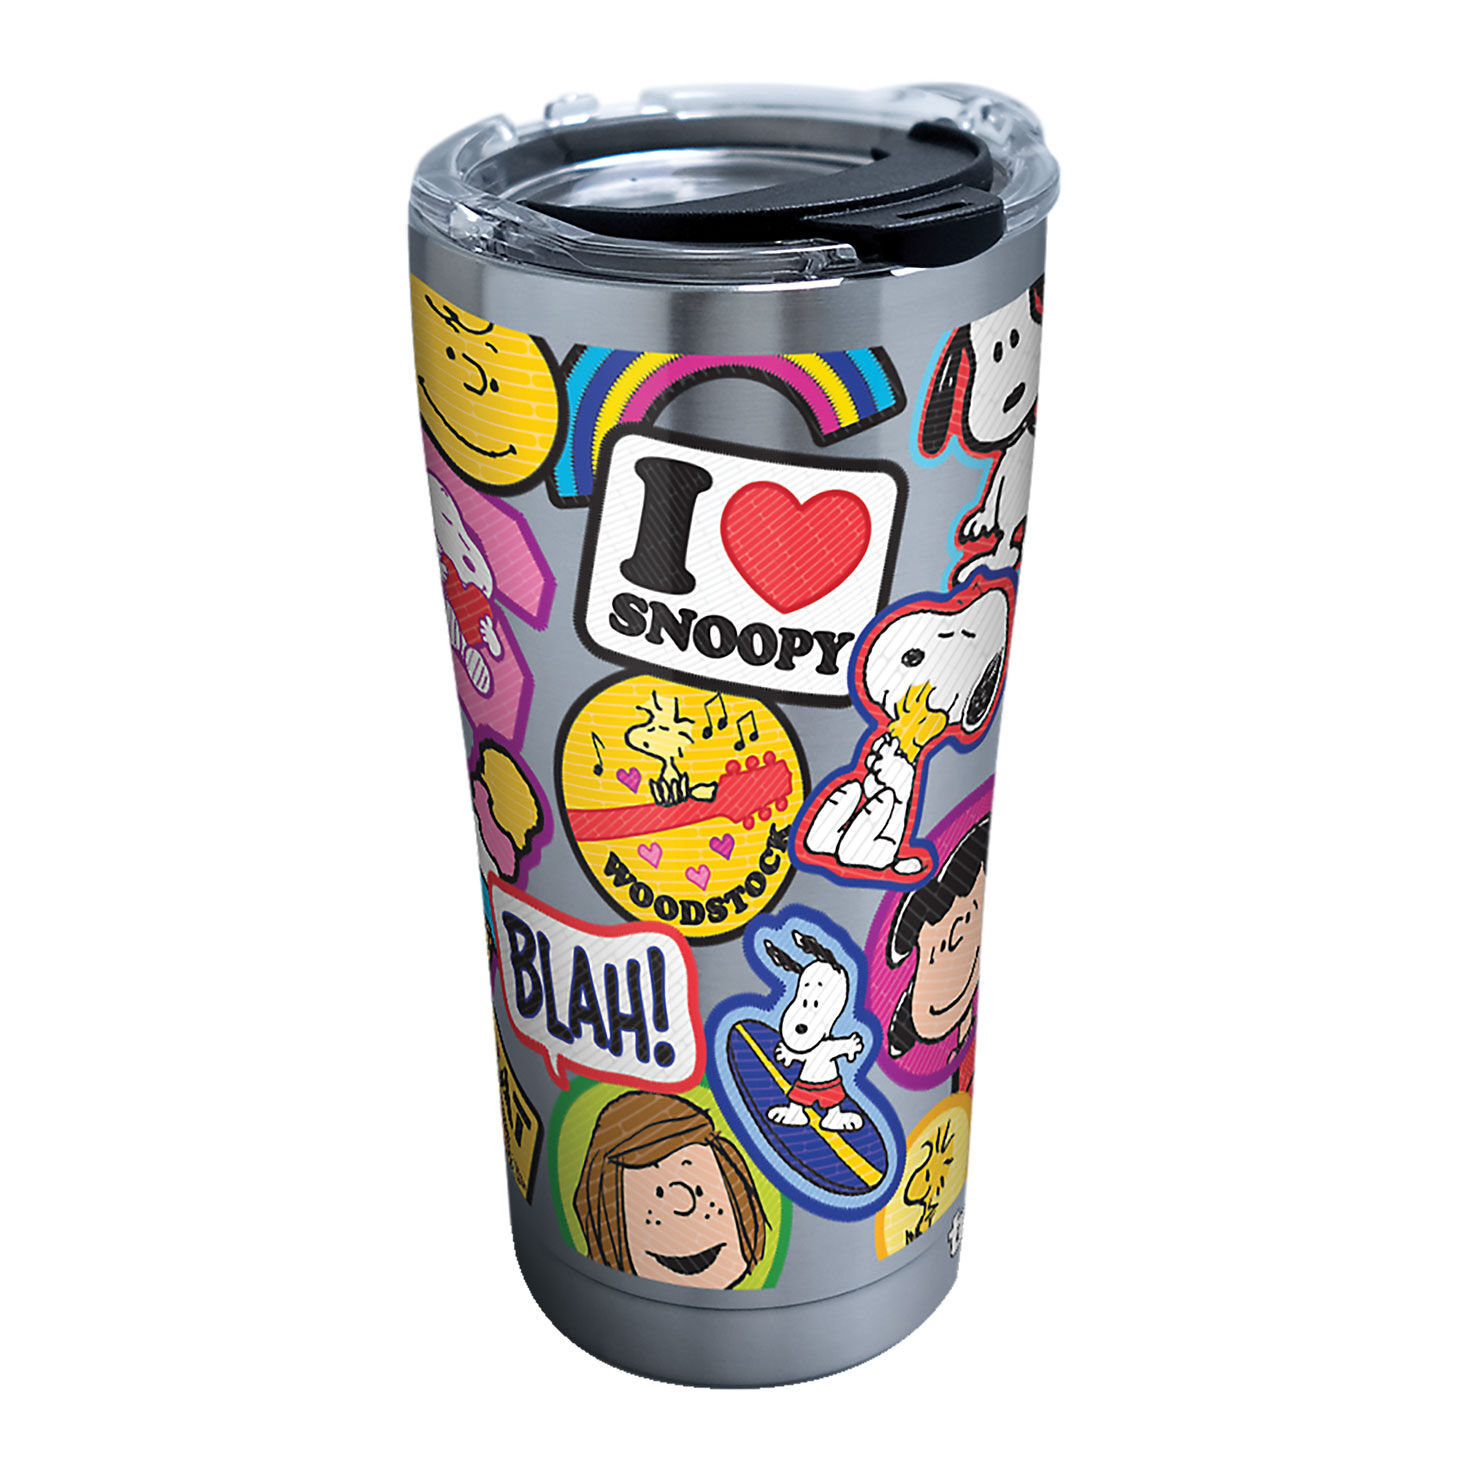 Tervis Peanuts Collage Stainless Steel Tumbler, 20 oz. - Insulated